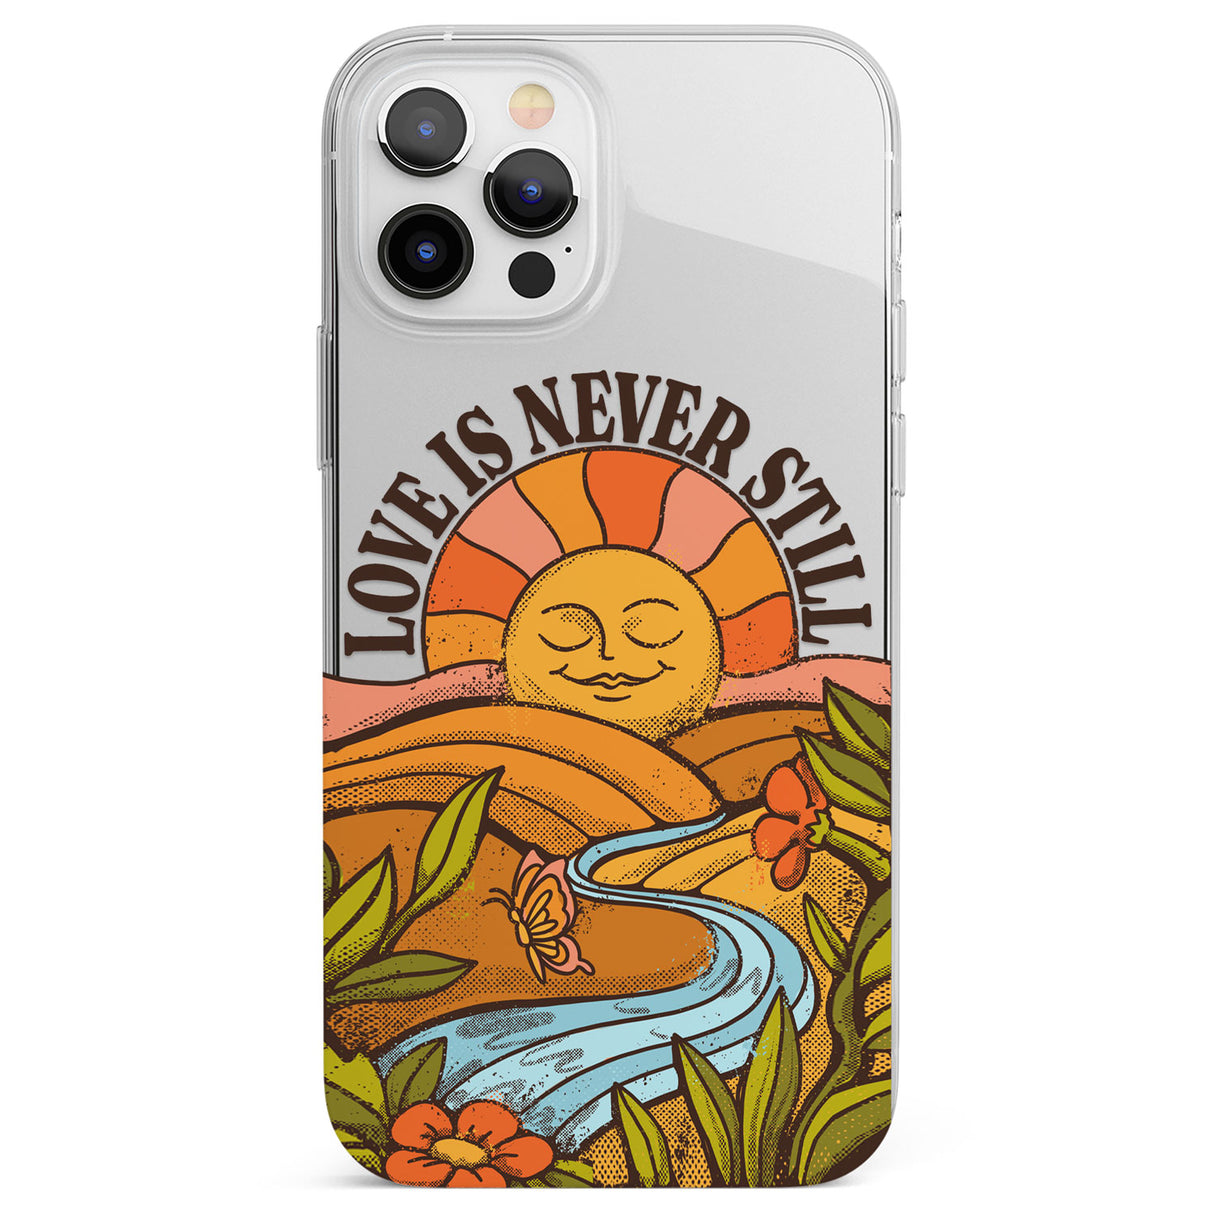 Love is Never Still Phone Case for iPhone 12 Pro